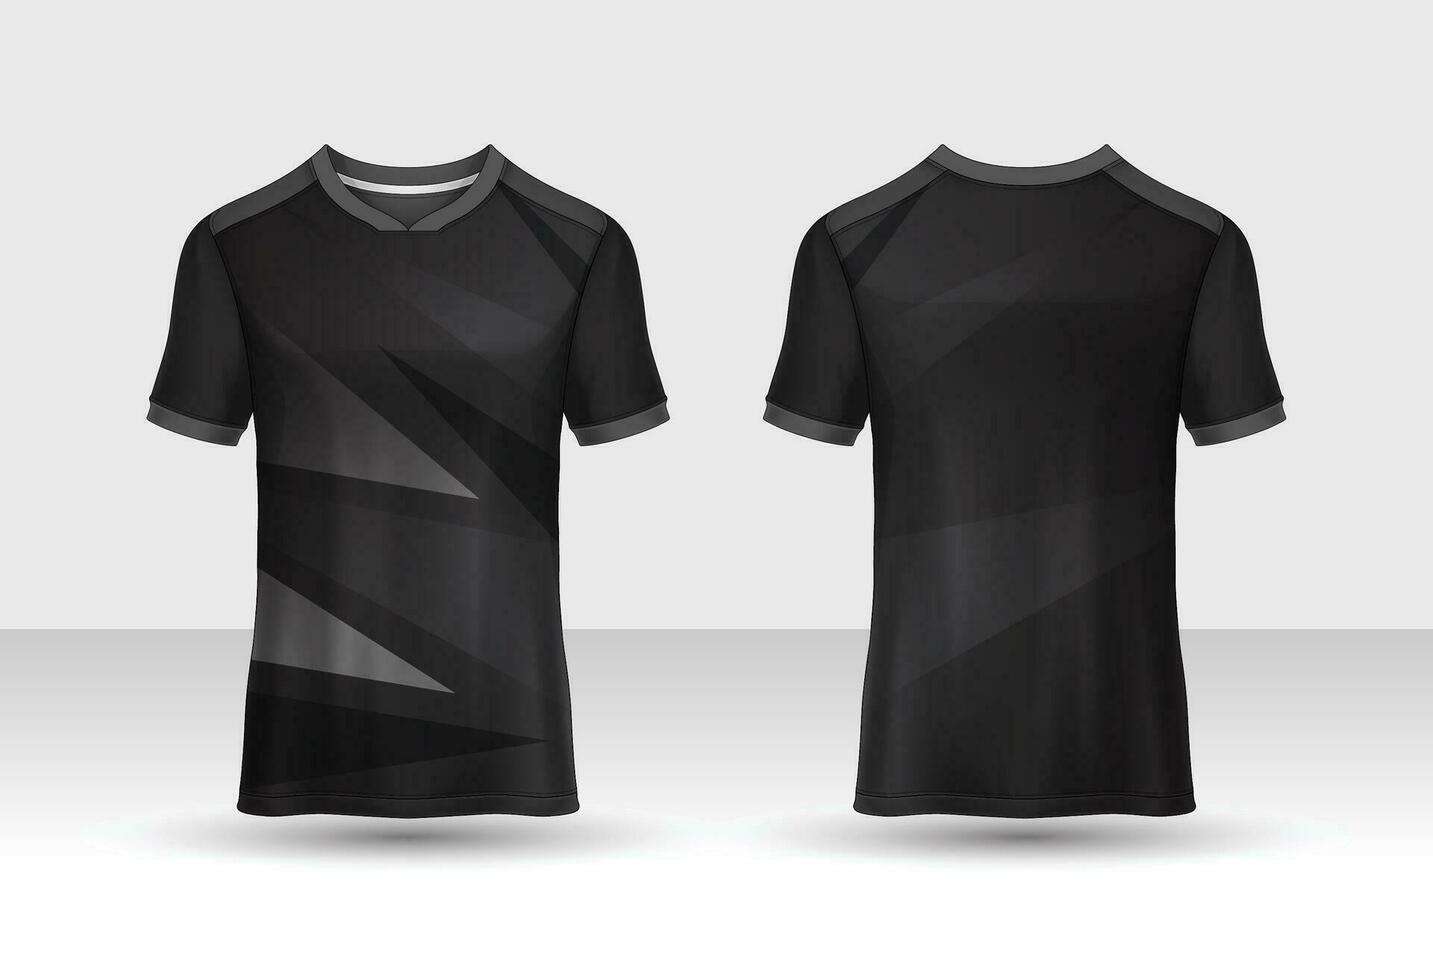 Sports jersey and t-shirt template sports jersey design vector mockup. Sports design for football, racing, gaming jersey.